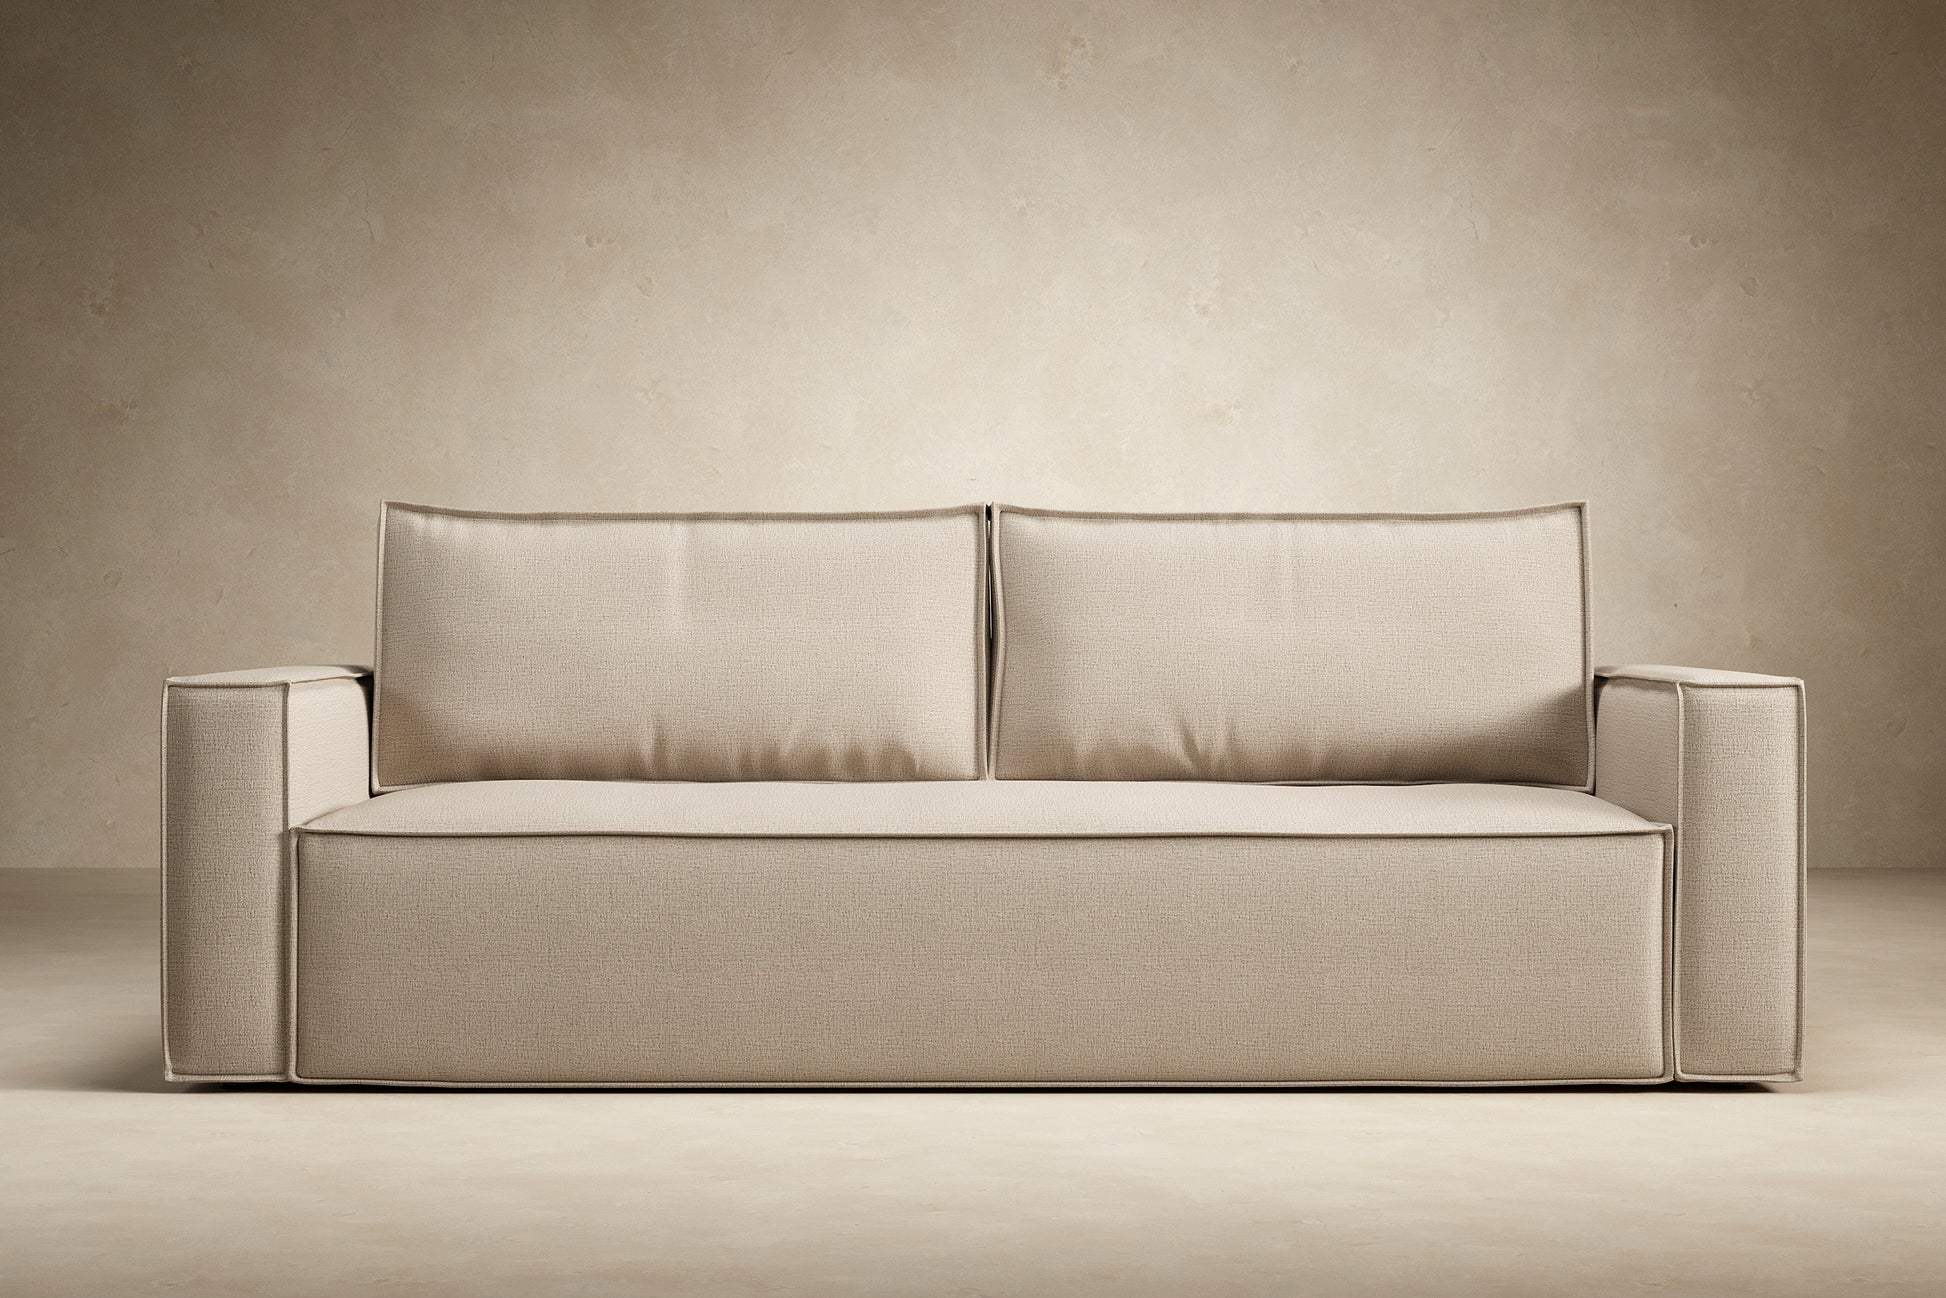 Innovation Living Newilla Sofa Bed With Standard Arms